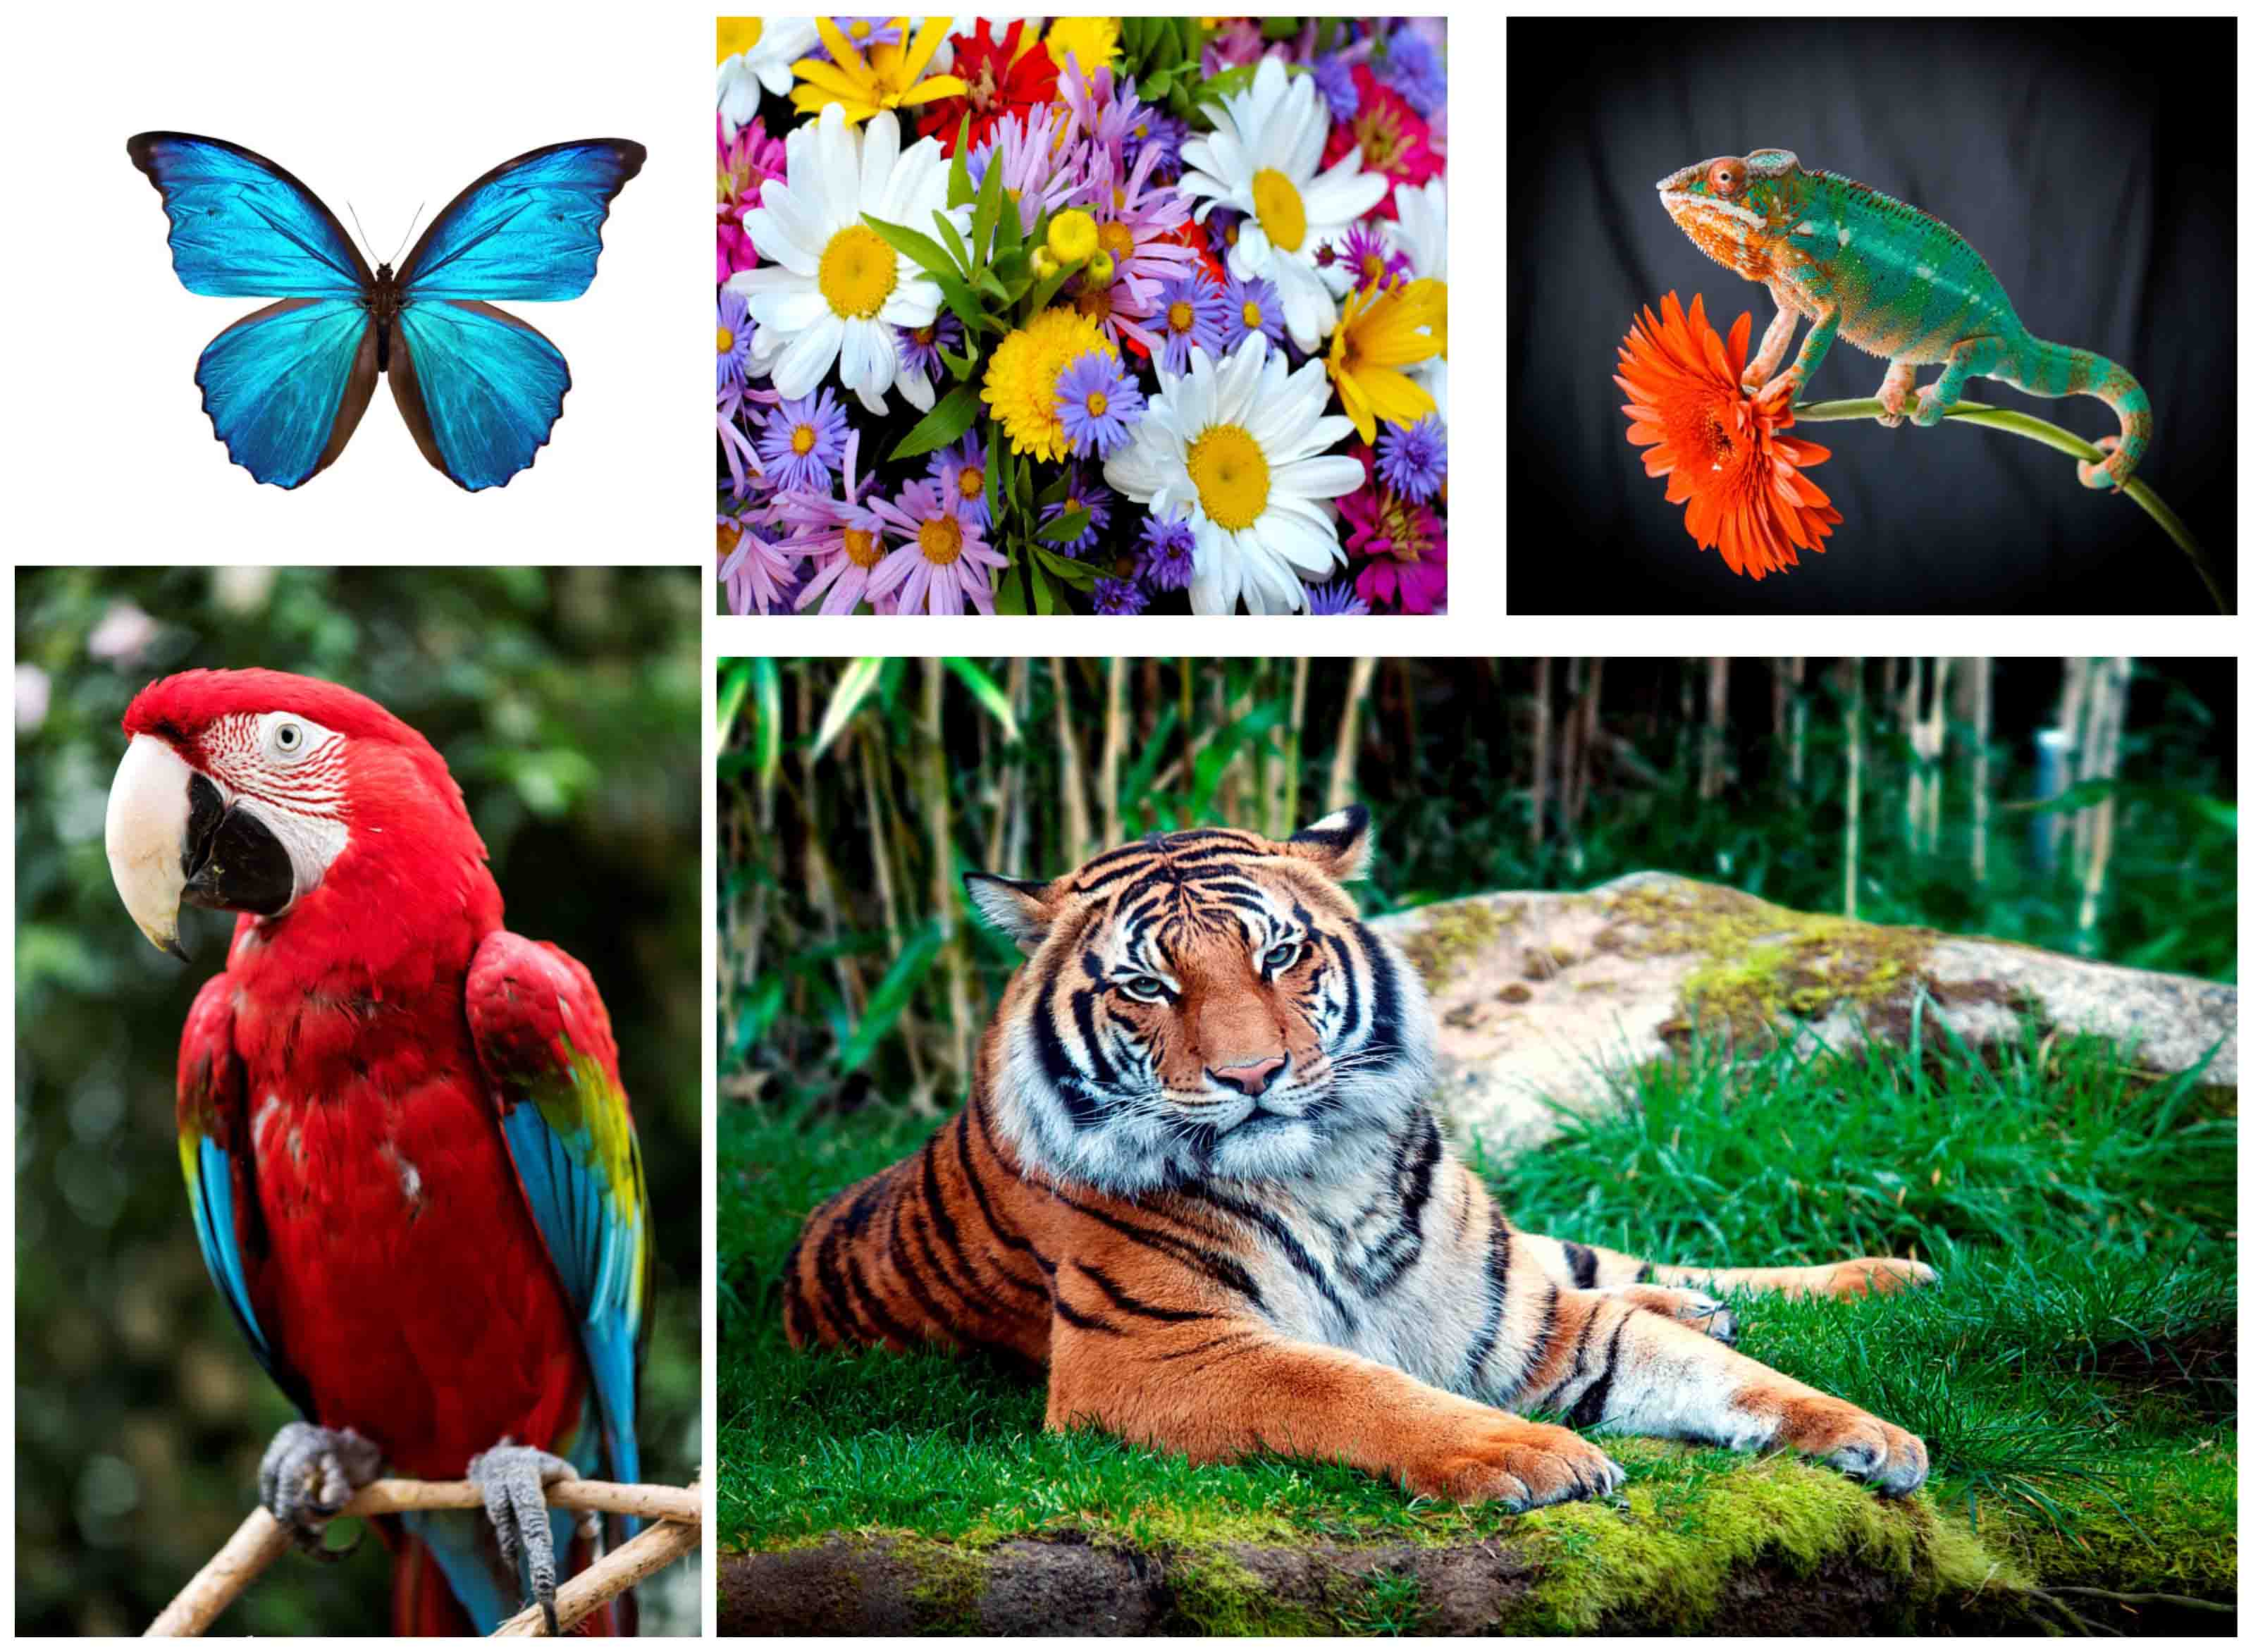 photographs of tiger, chameleon, butterfly, flowers, and parrot.